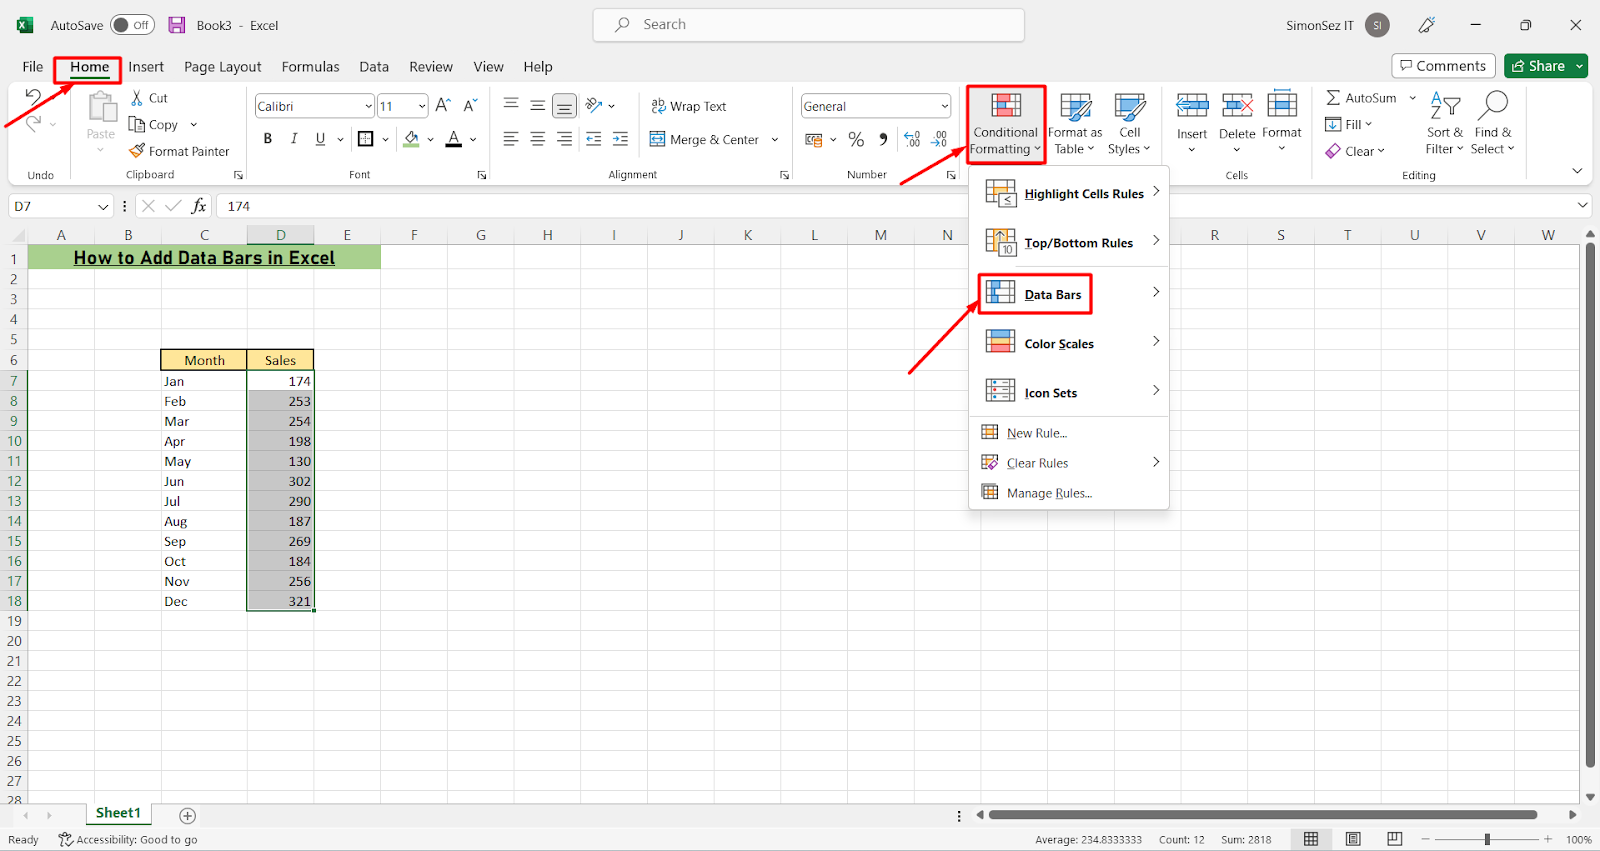 How to Add Data bars in Excel- Data bars under conditional formatting